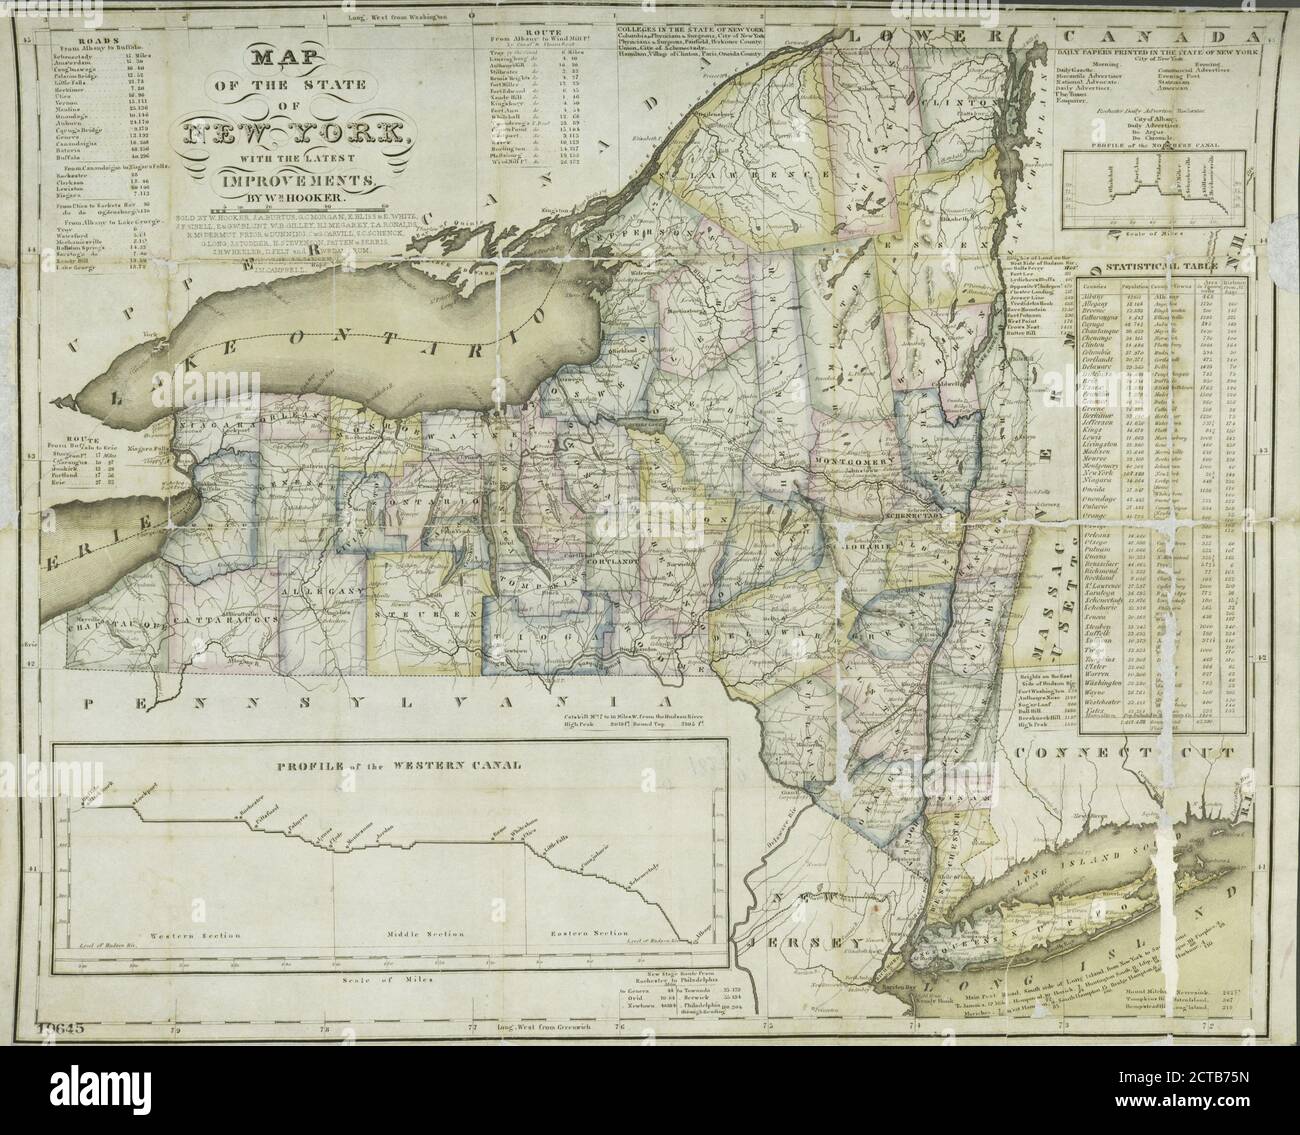 Map of the State of New York : with the latest improvements, cartographic, Maps, 1827 Stock Photo